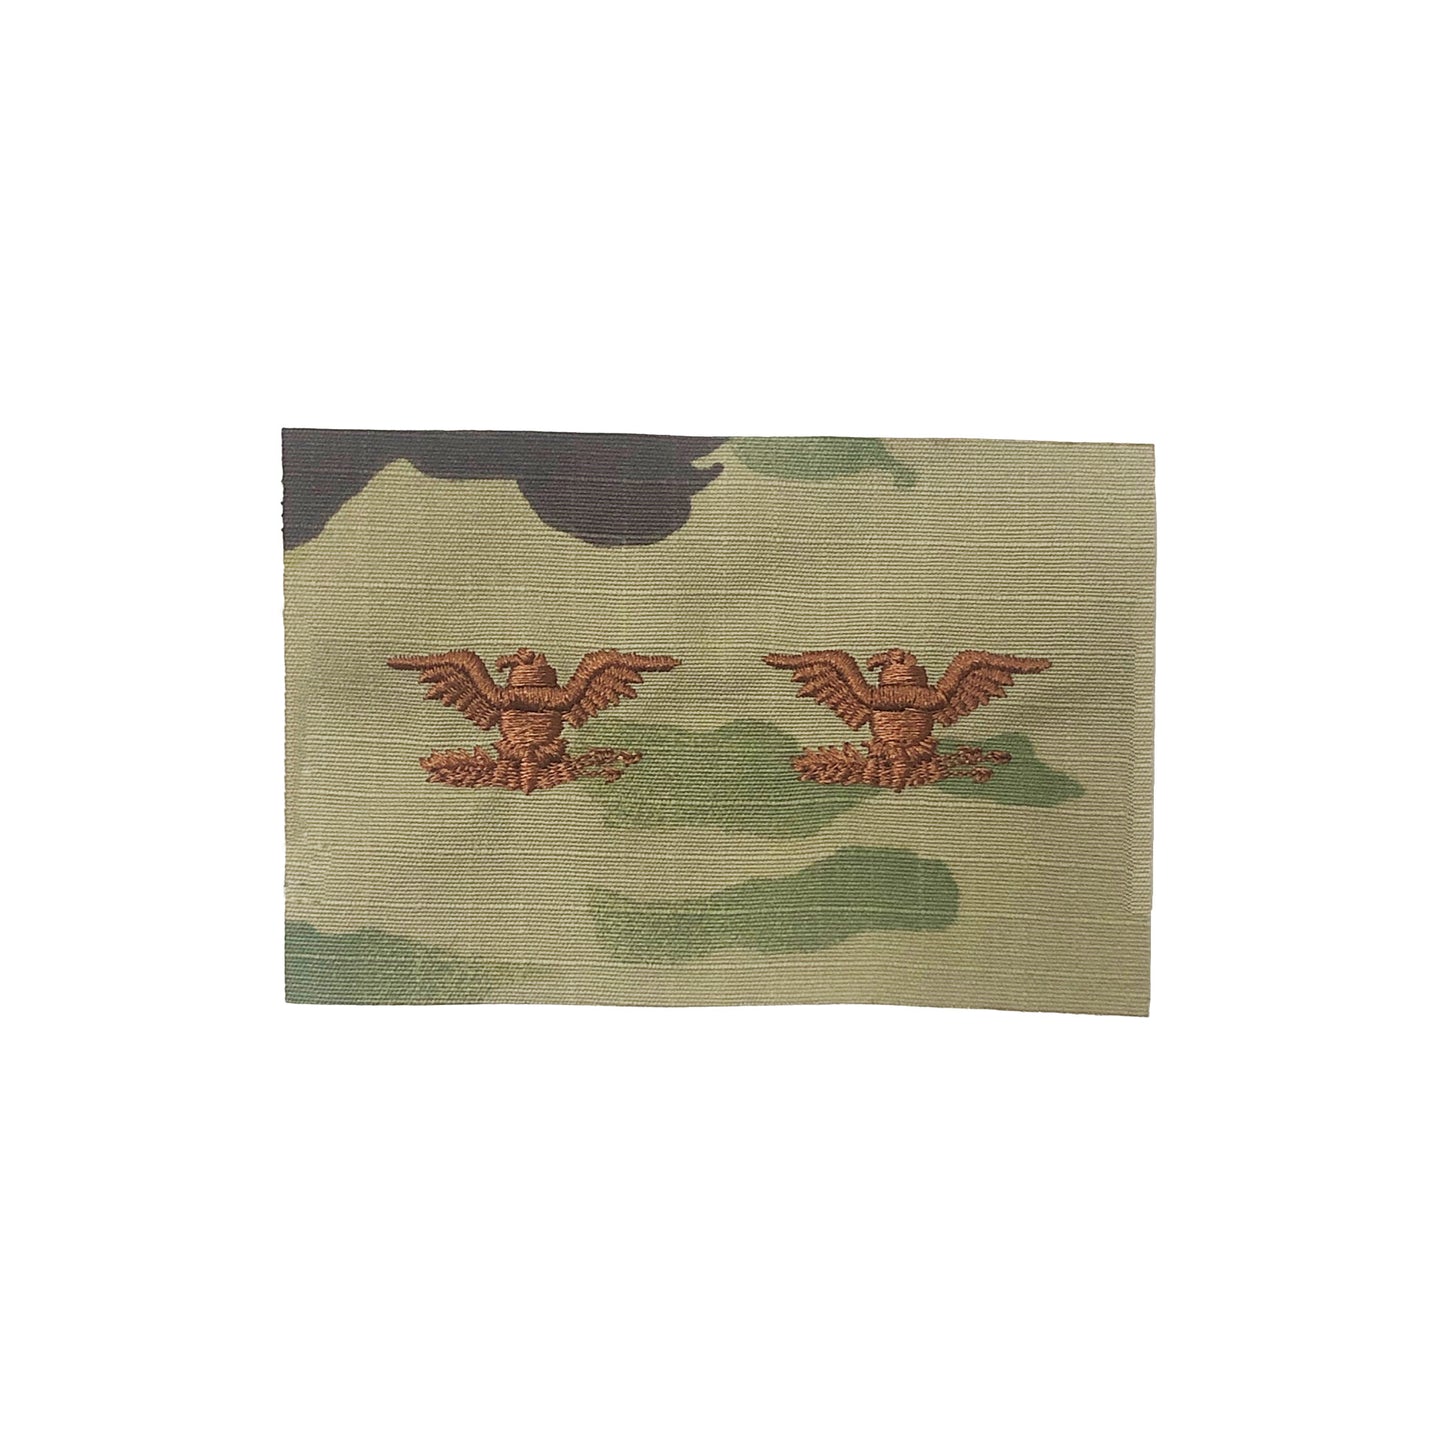 U.S. Air Force O6 Colonel OCP Spice Brown Sew-on Rank For Cap “Only”